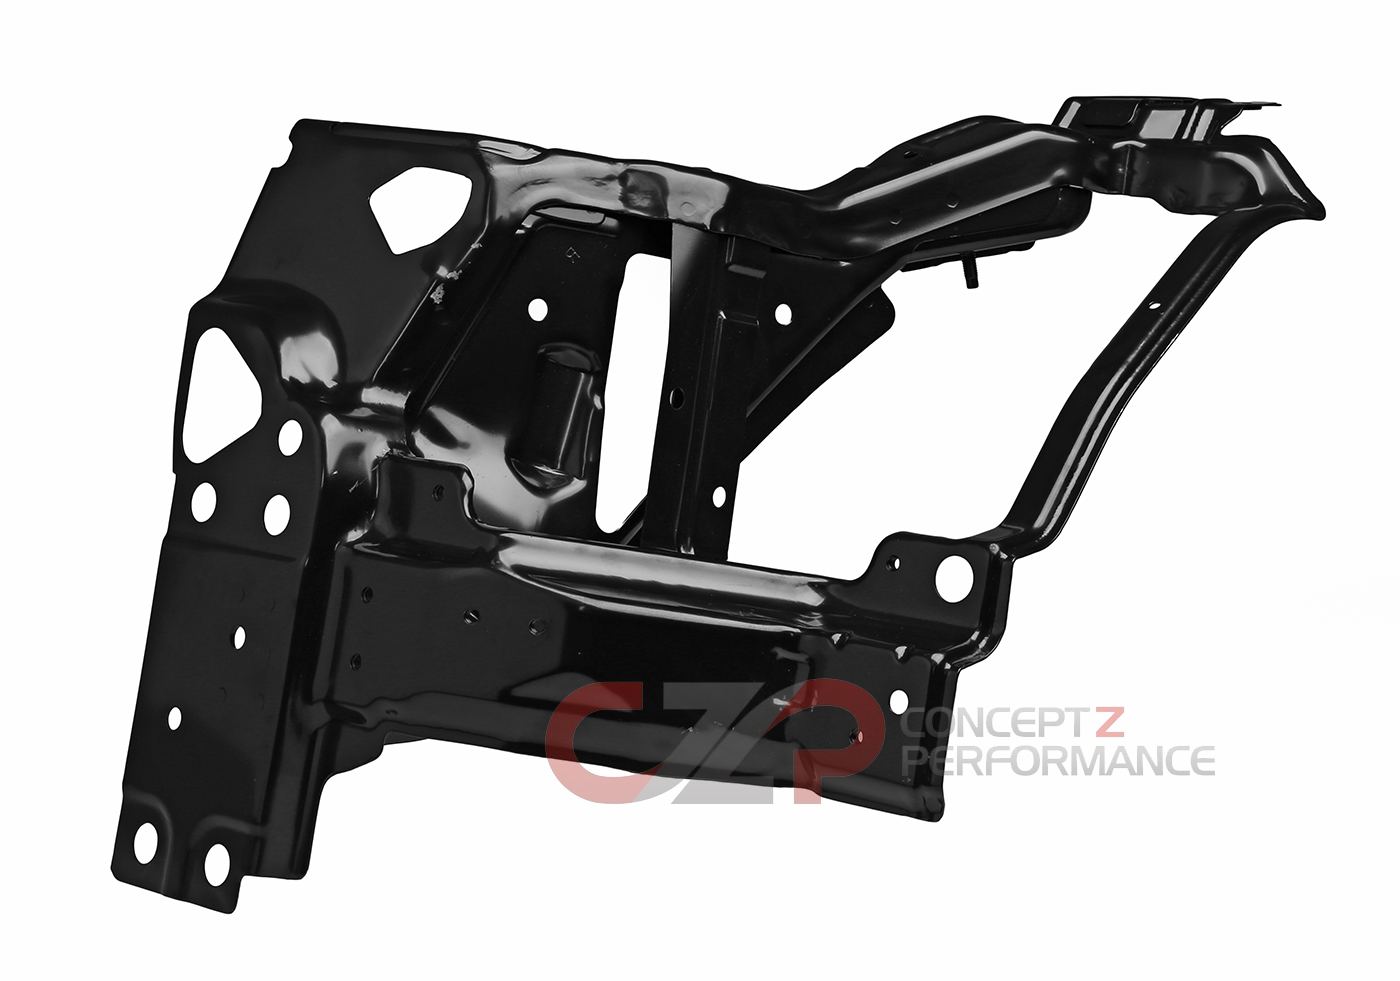 Body & Aero :: Structural Chassis Components - Concept Z Performance